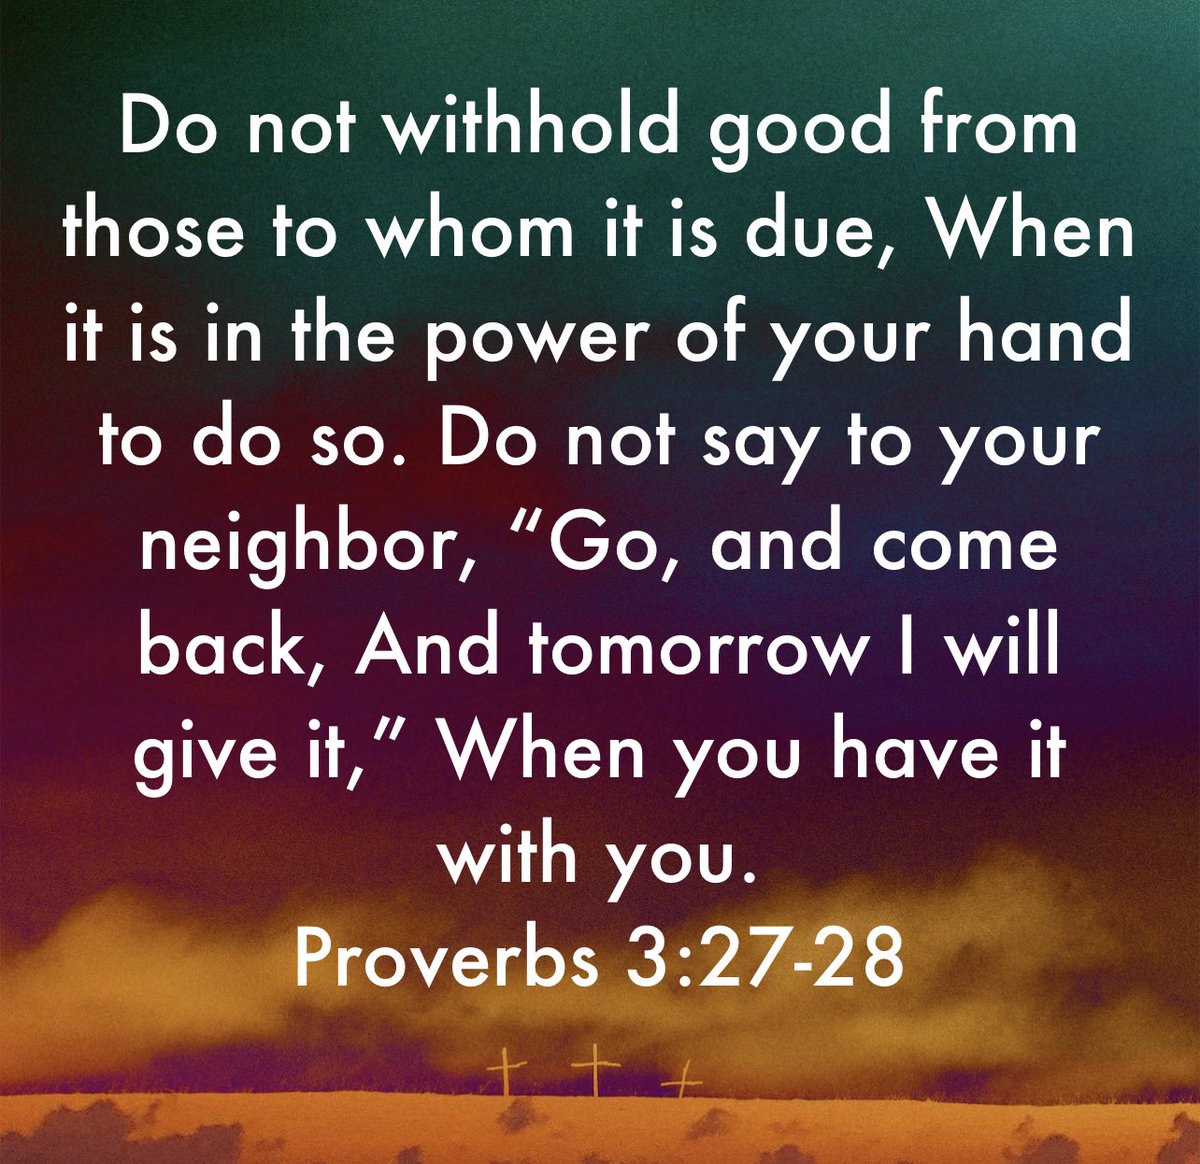 Sometimes delaying to do good for someone when it’s in our power can be a great injustice…

What good is in your power to do today? 
Do it… give some power away ❤️
#wordsoflife
#proverbdaily